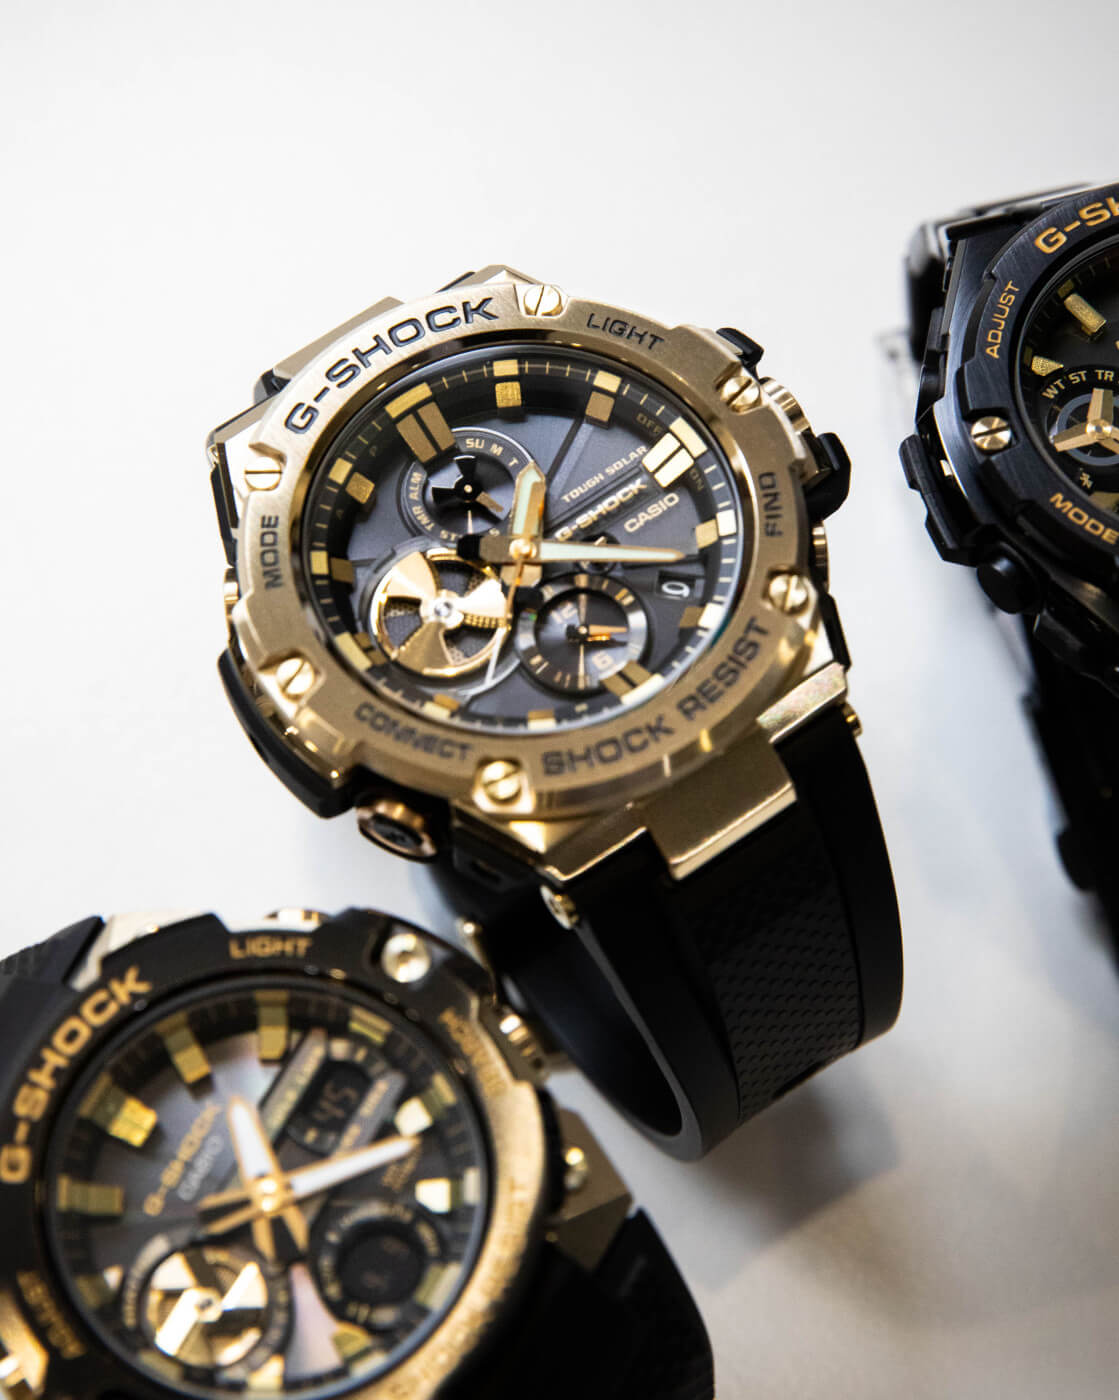 How To Know If Your G-Shock Watch Is Original